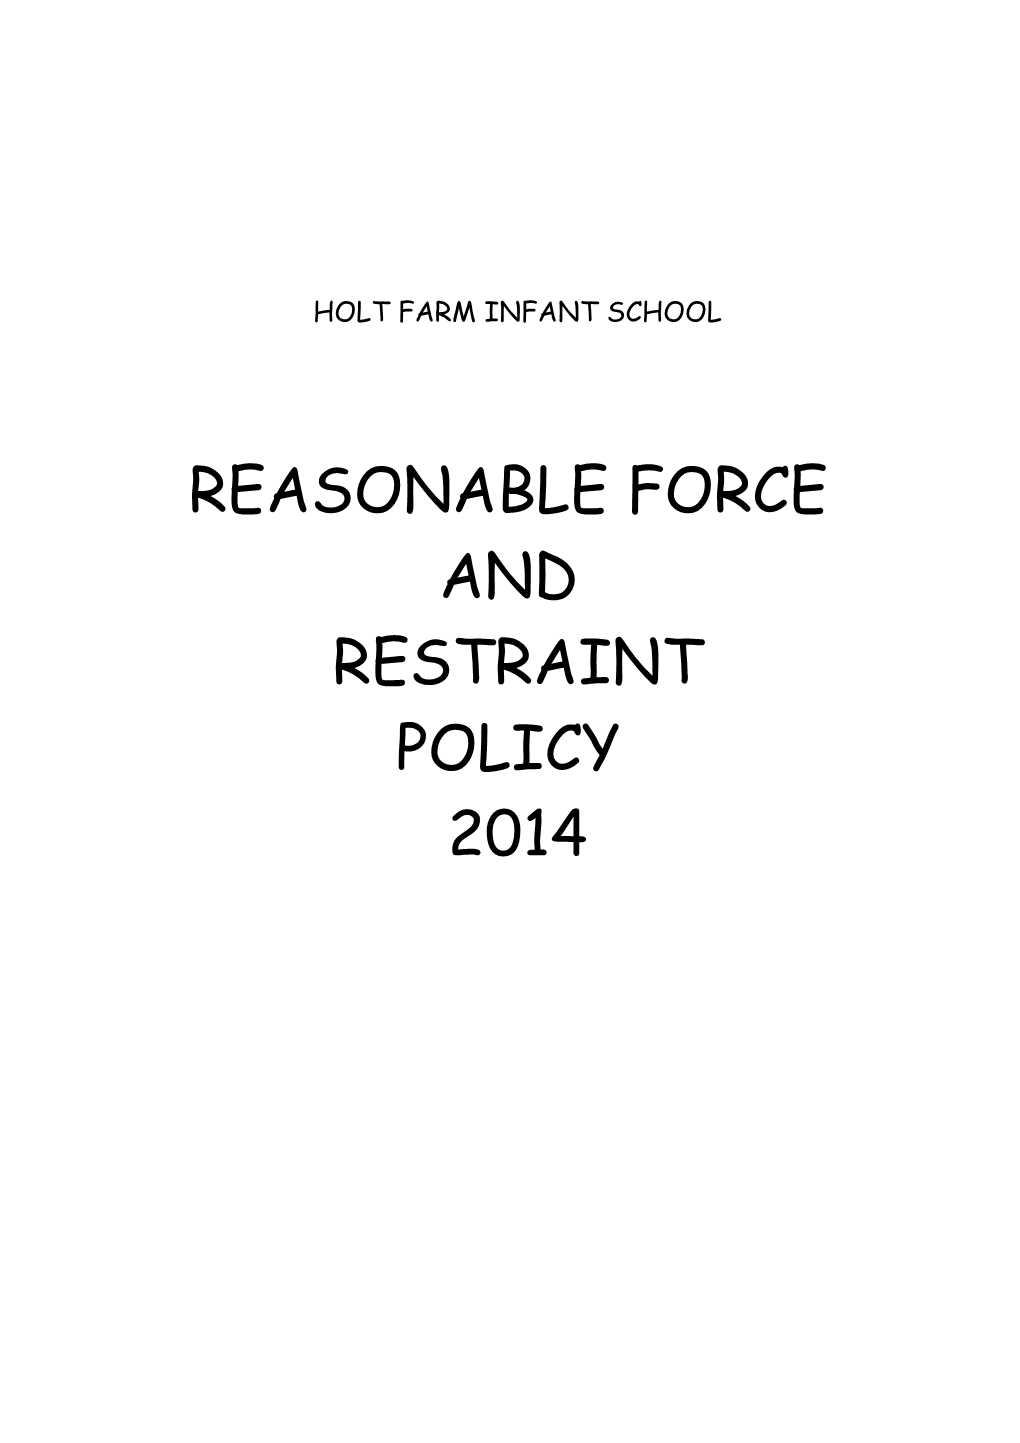 Reasonable Force and Restraint Policy